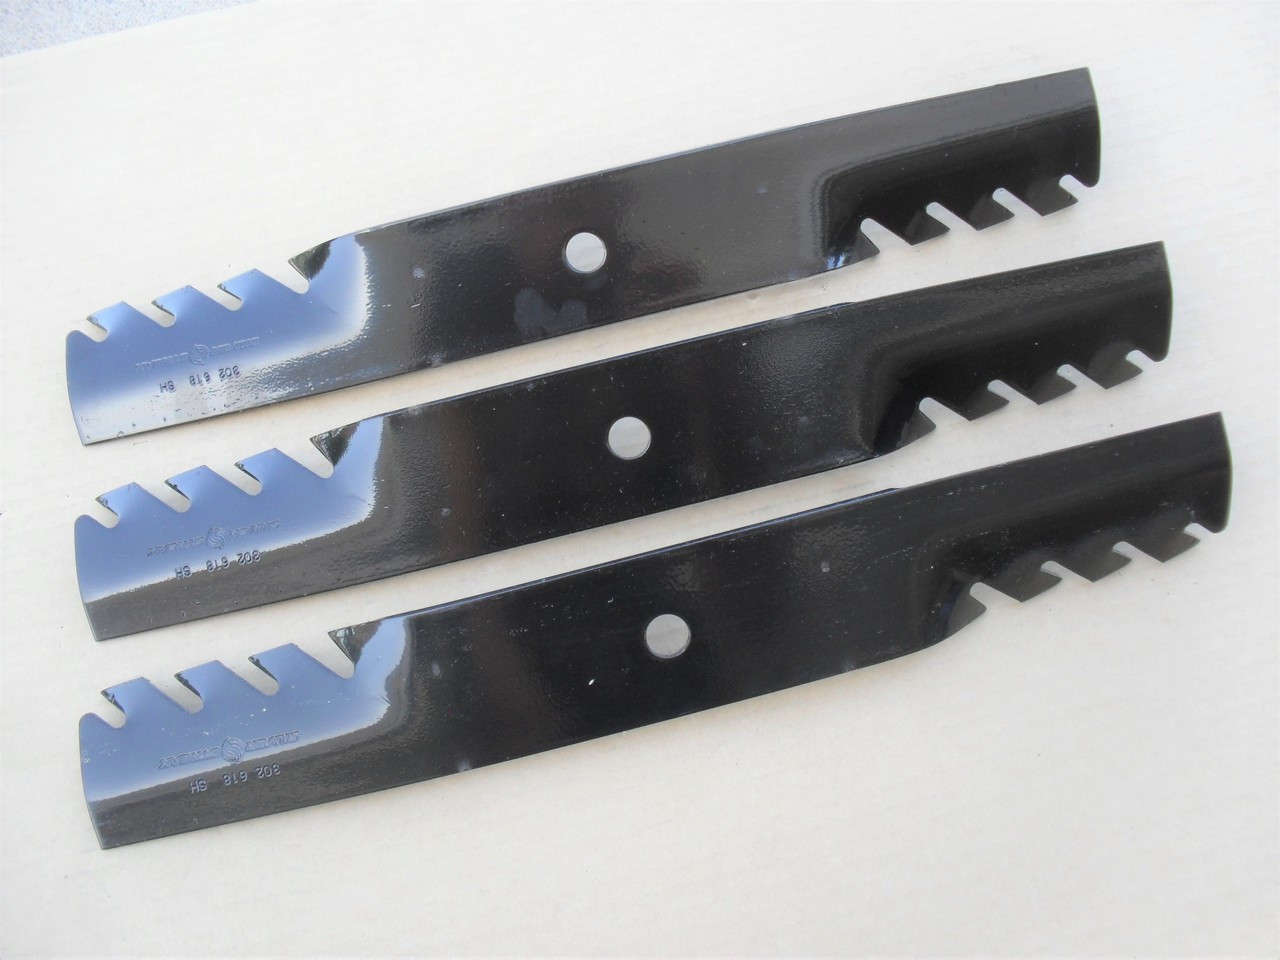 Toothed Mulching Blades for Lesco 36", 52" Cut 050125, 050140, 050241, 50125, 50140, PL4206 mulcher